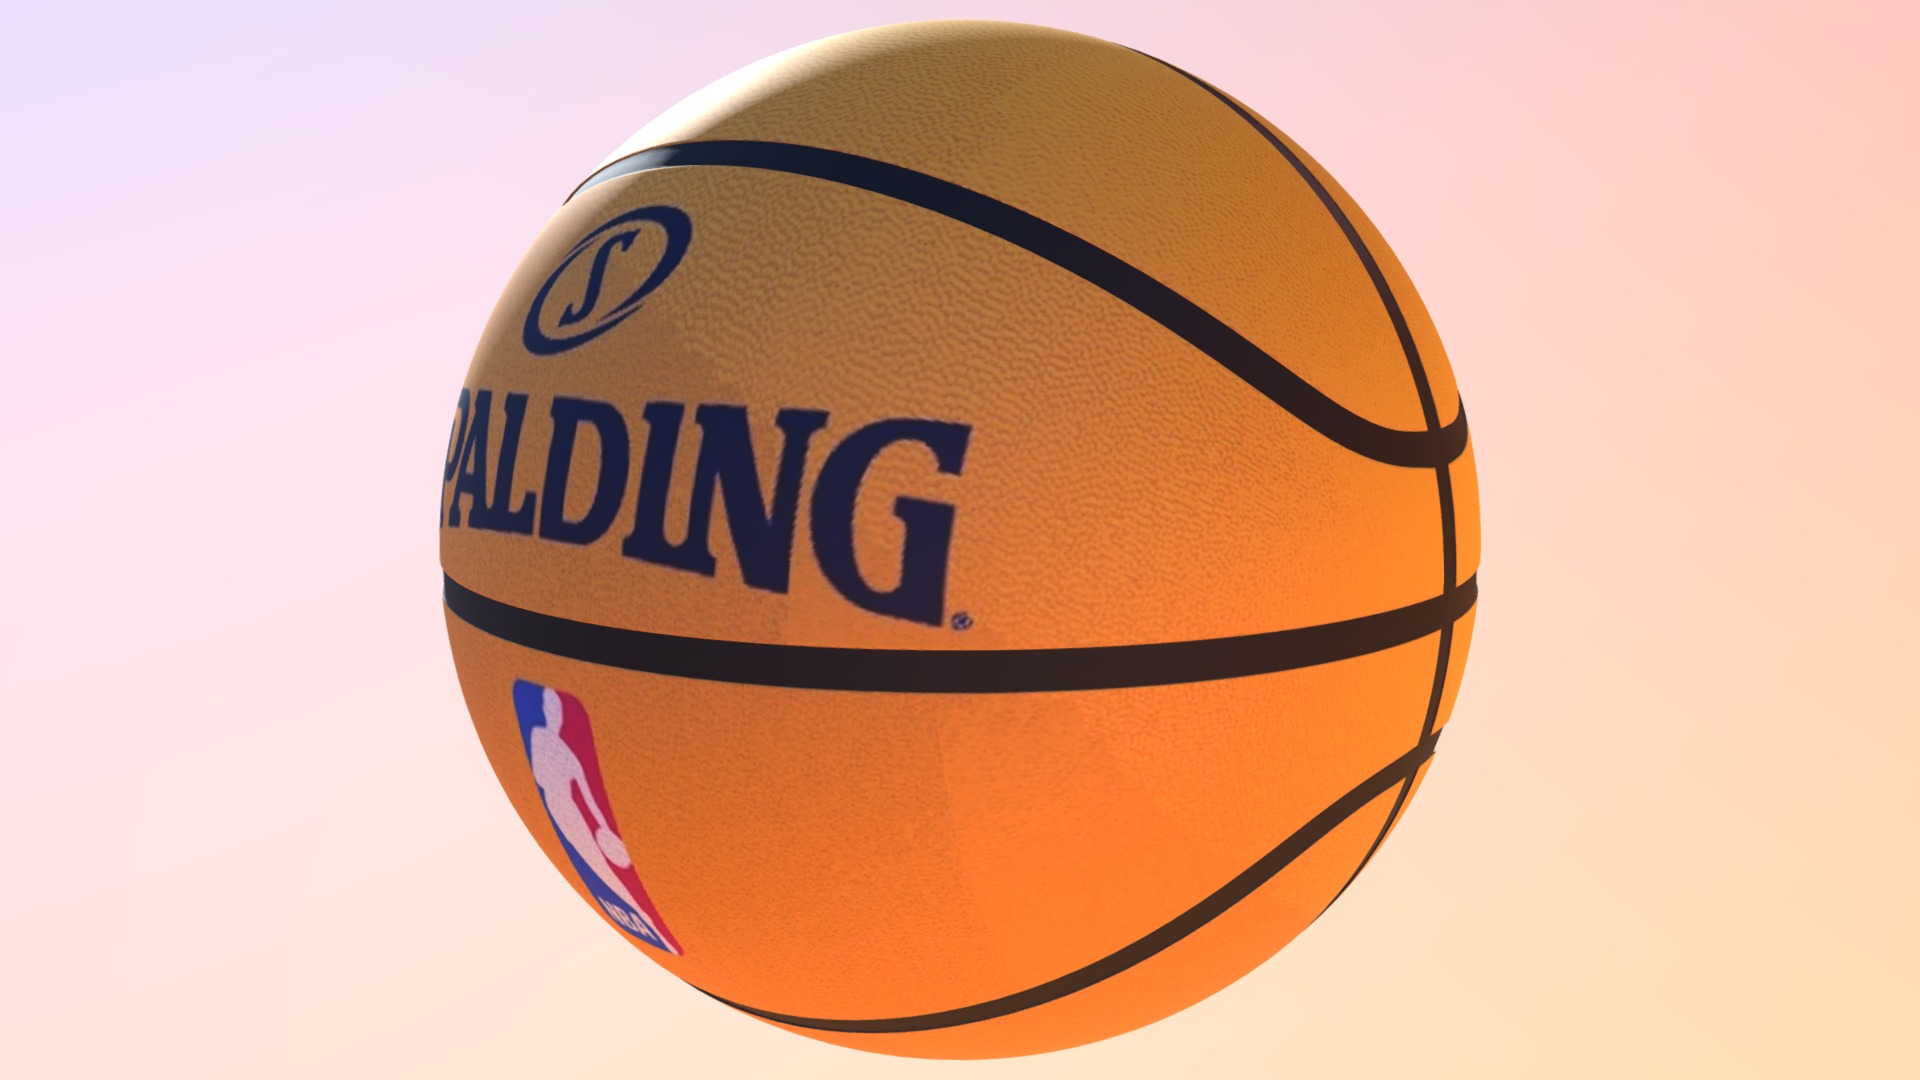 3D model Basket Ball - This is a 3D model of the Basket Ball. The 3D model is about a yellow and black basketball.